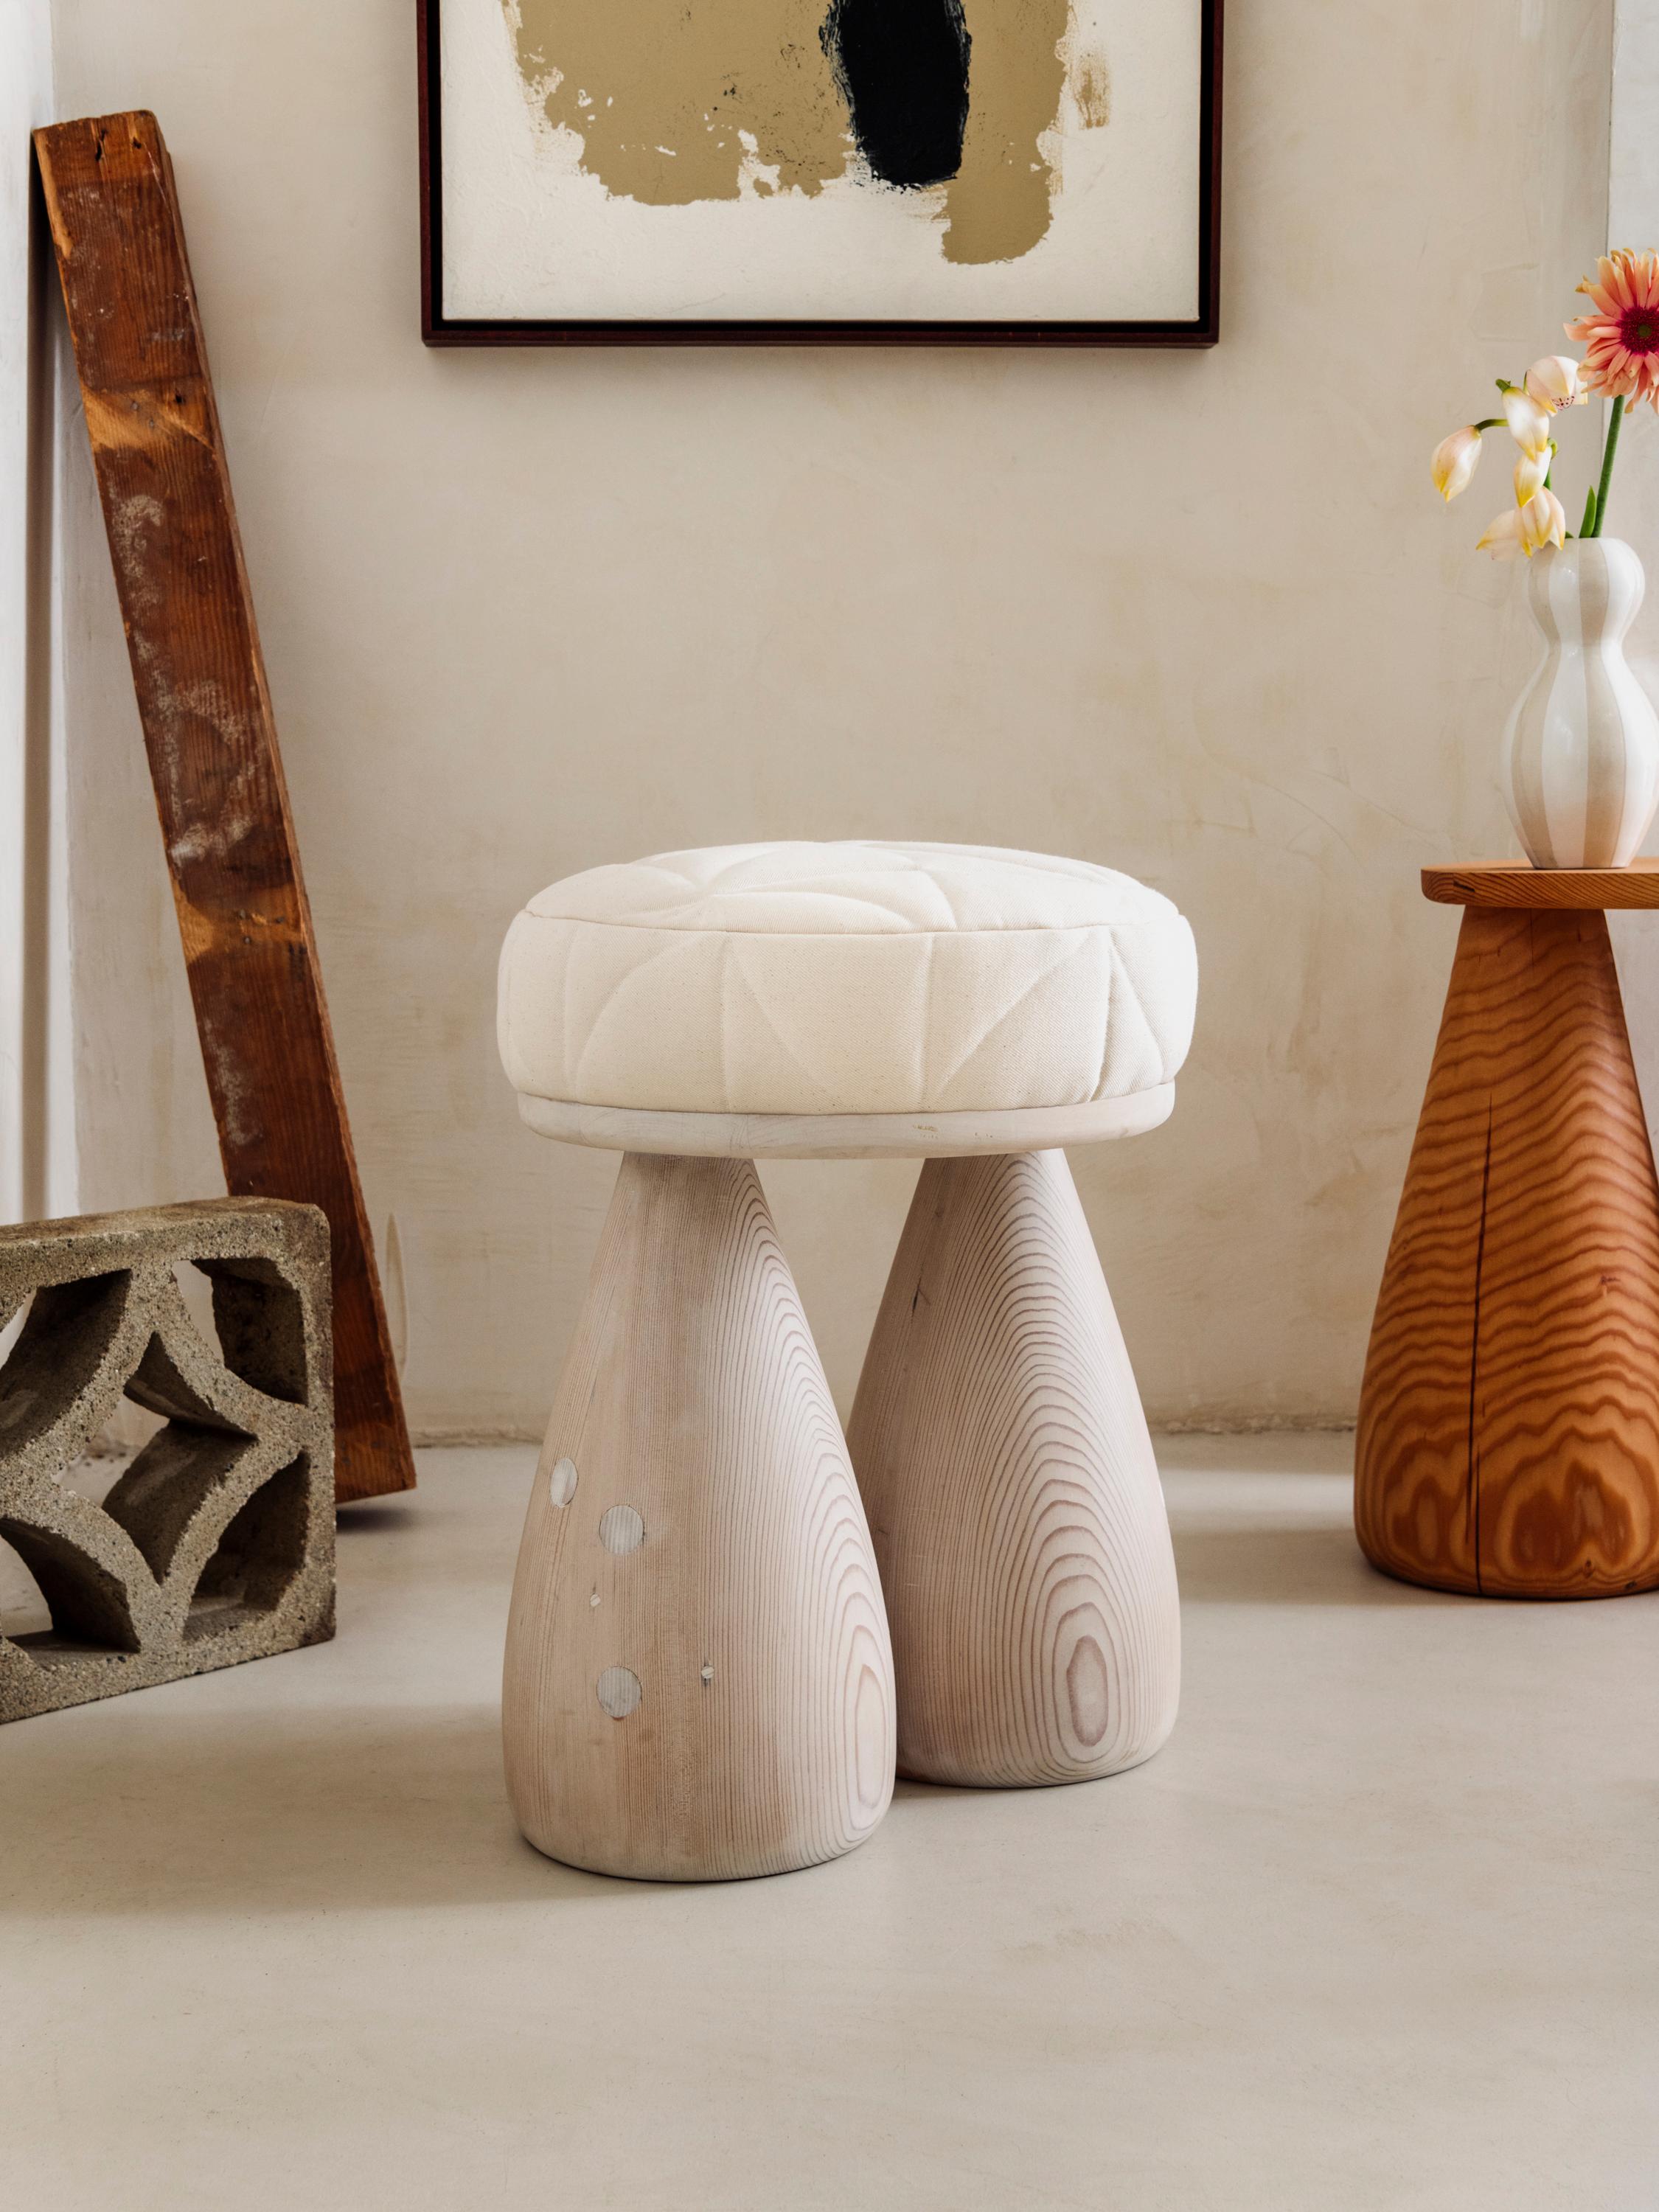 As part of Studio Sam Klemick's second collection The Quilted Cutie Stool debuted originally in 2023. The hand built wooden stool is made in Los Angeles California. The seat has be upholstered with hand quilted canvas. Signature Bell shaped legs